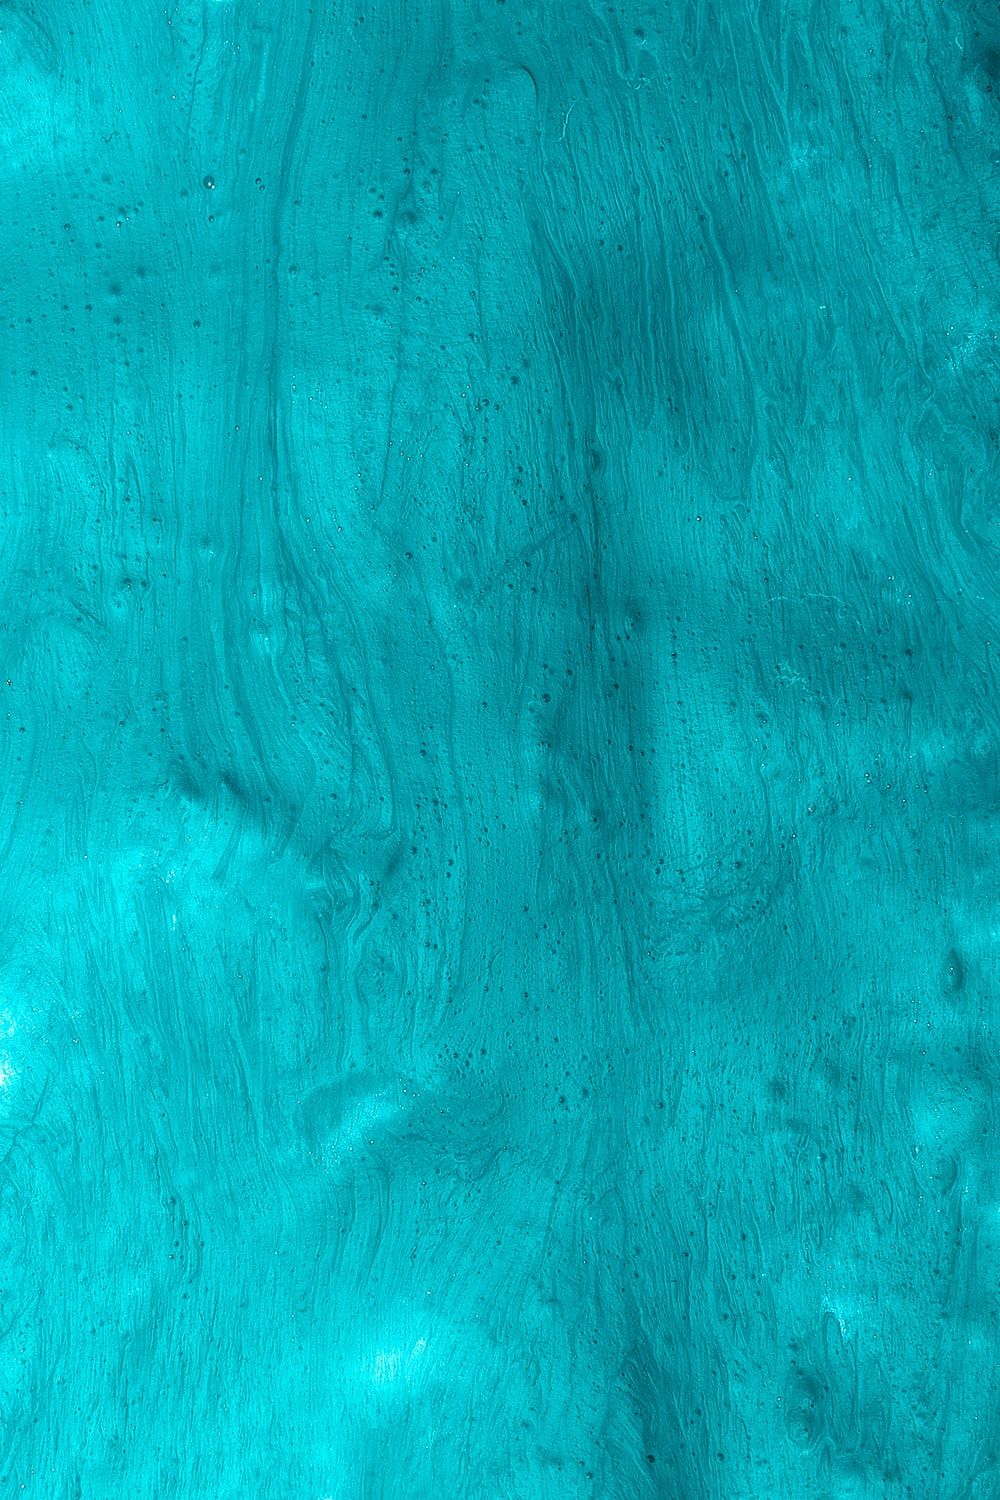 Green Texture Picture. Download Free Image